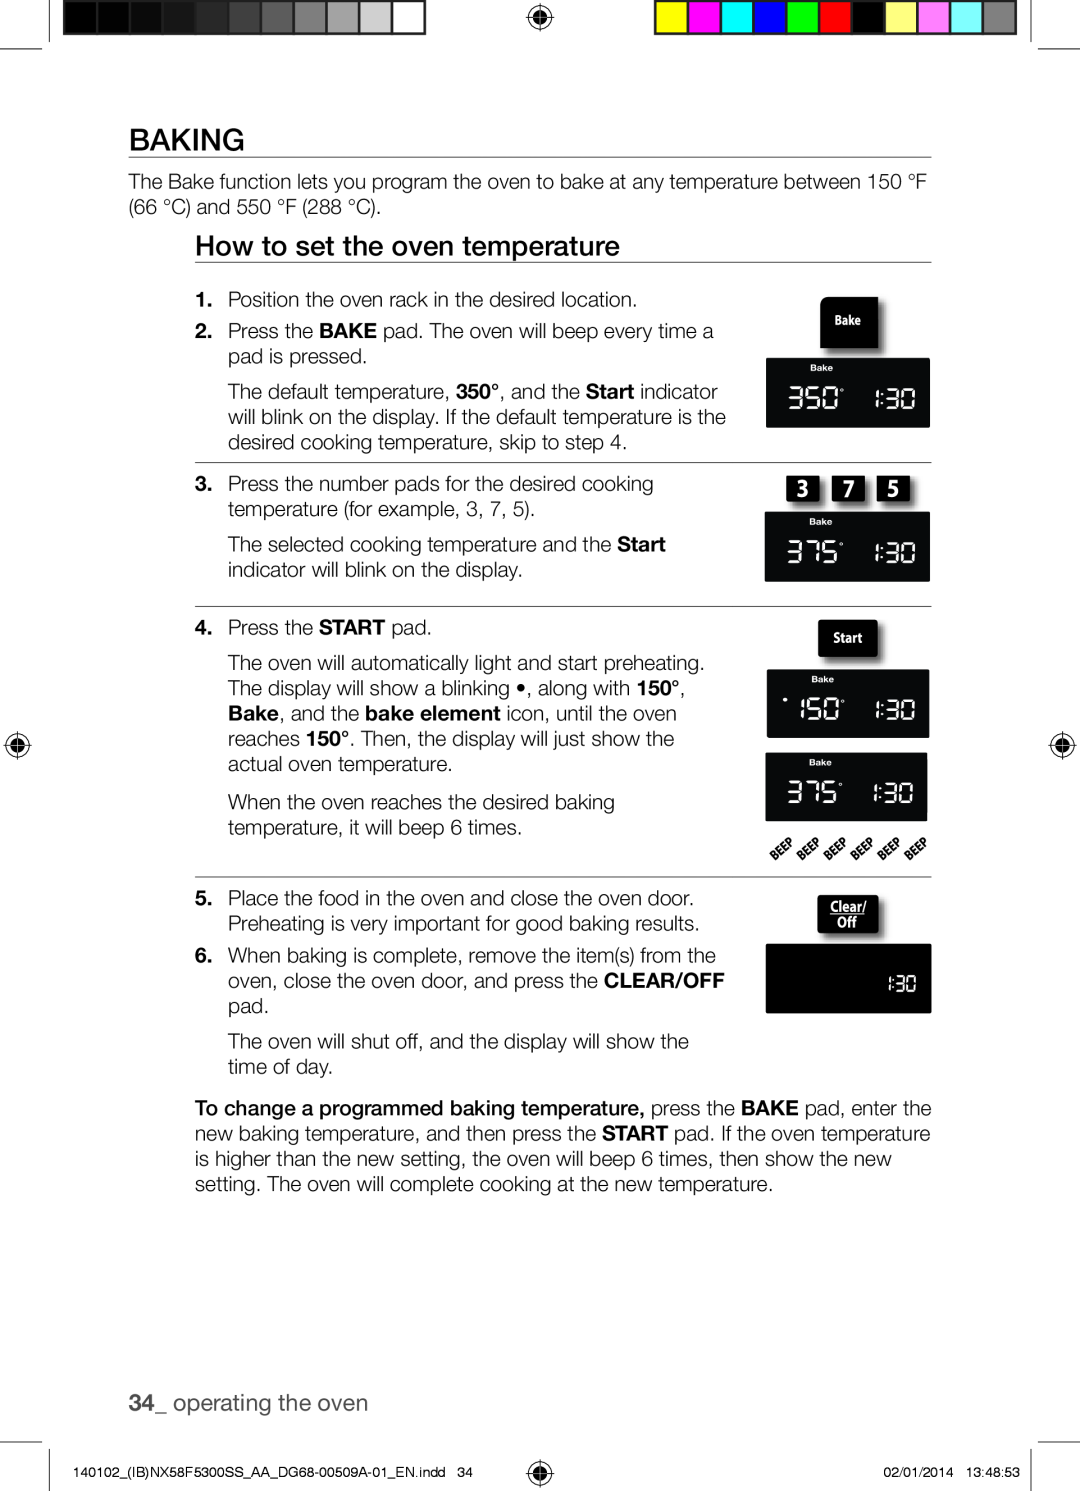 Samsung NX58F5500SW user manual Baking, How to set the oven temperature, operating the oven 